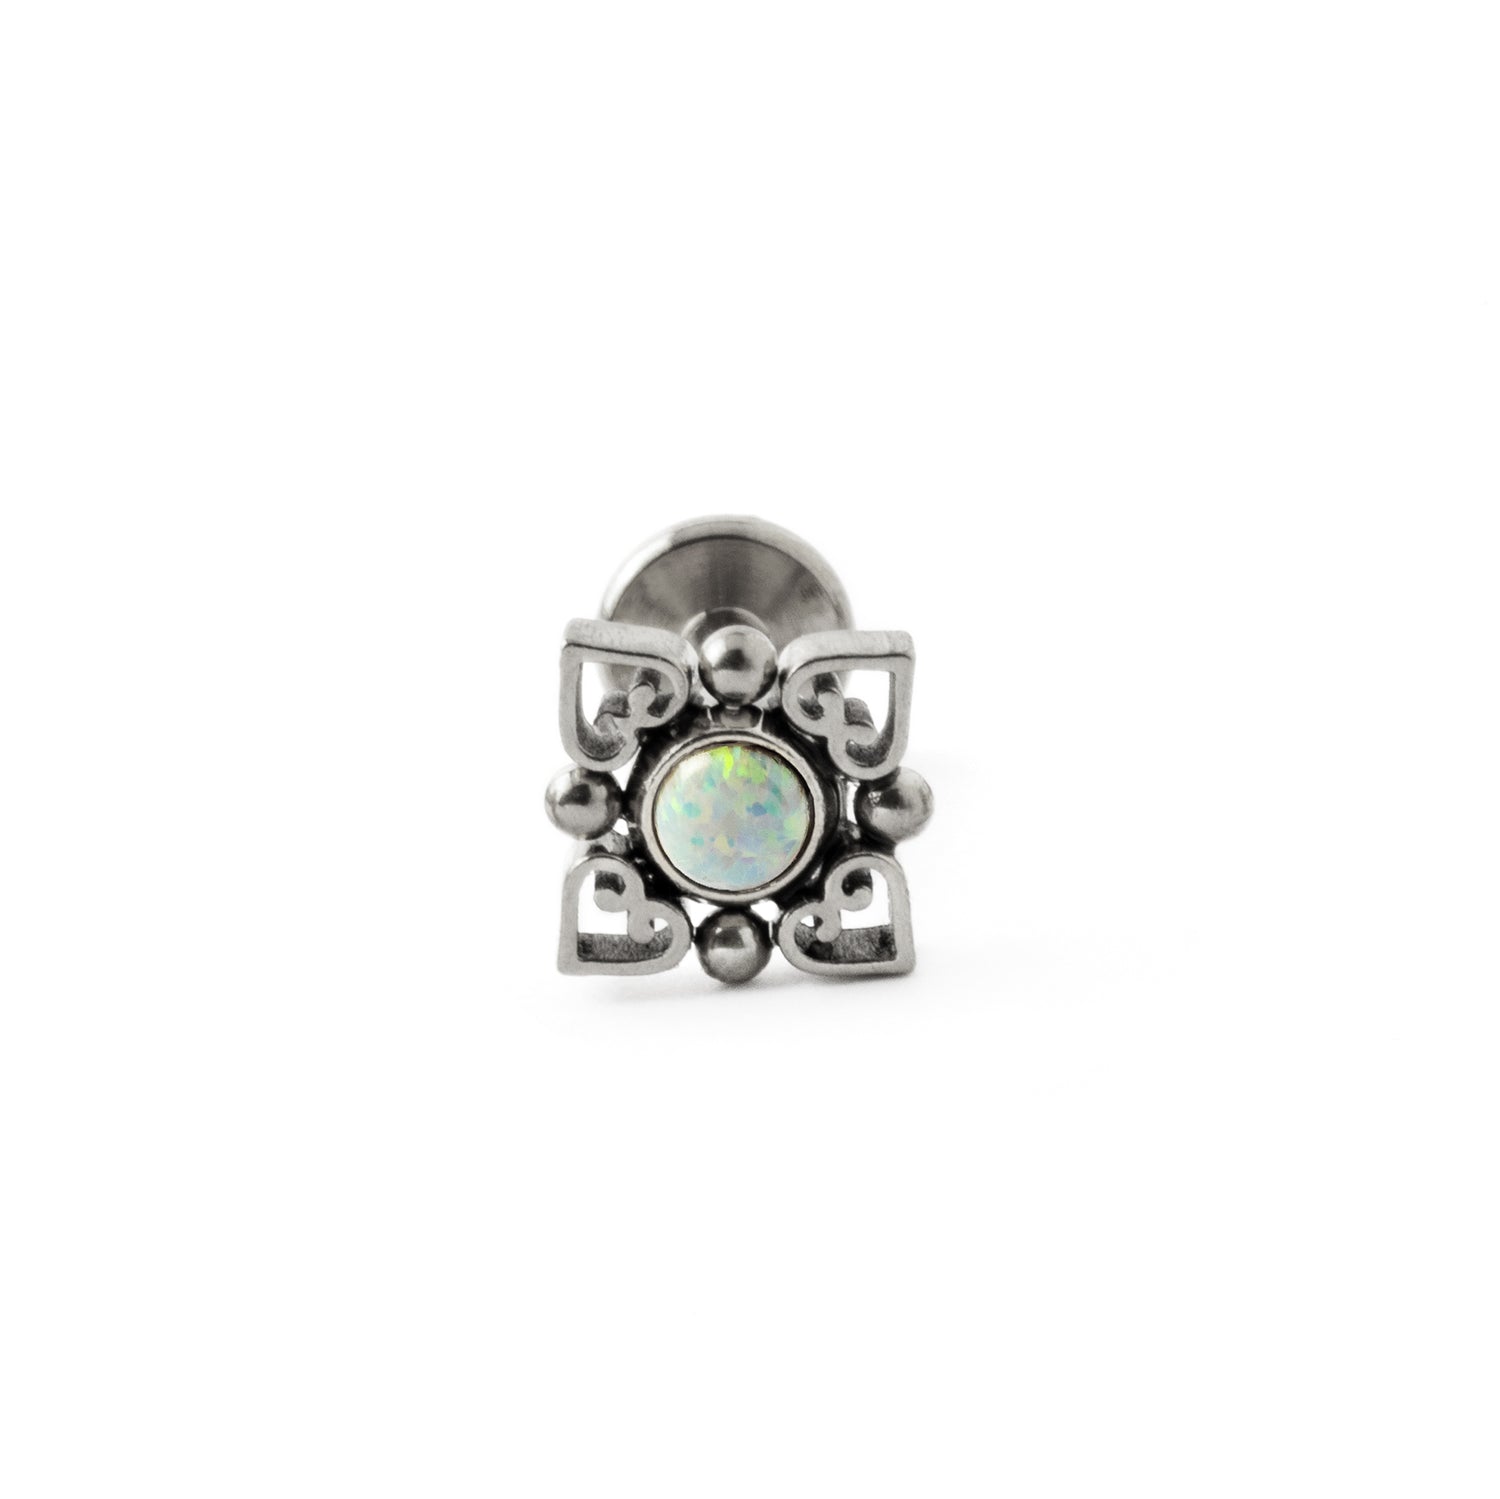 Neptune surgical steel internally threaded flat back Labret with White Opal frontal view